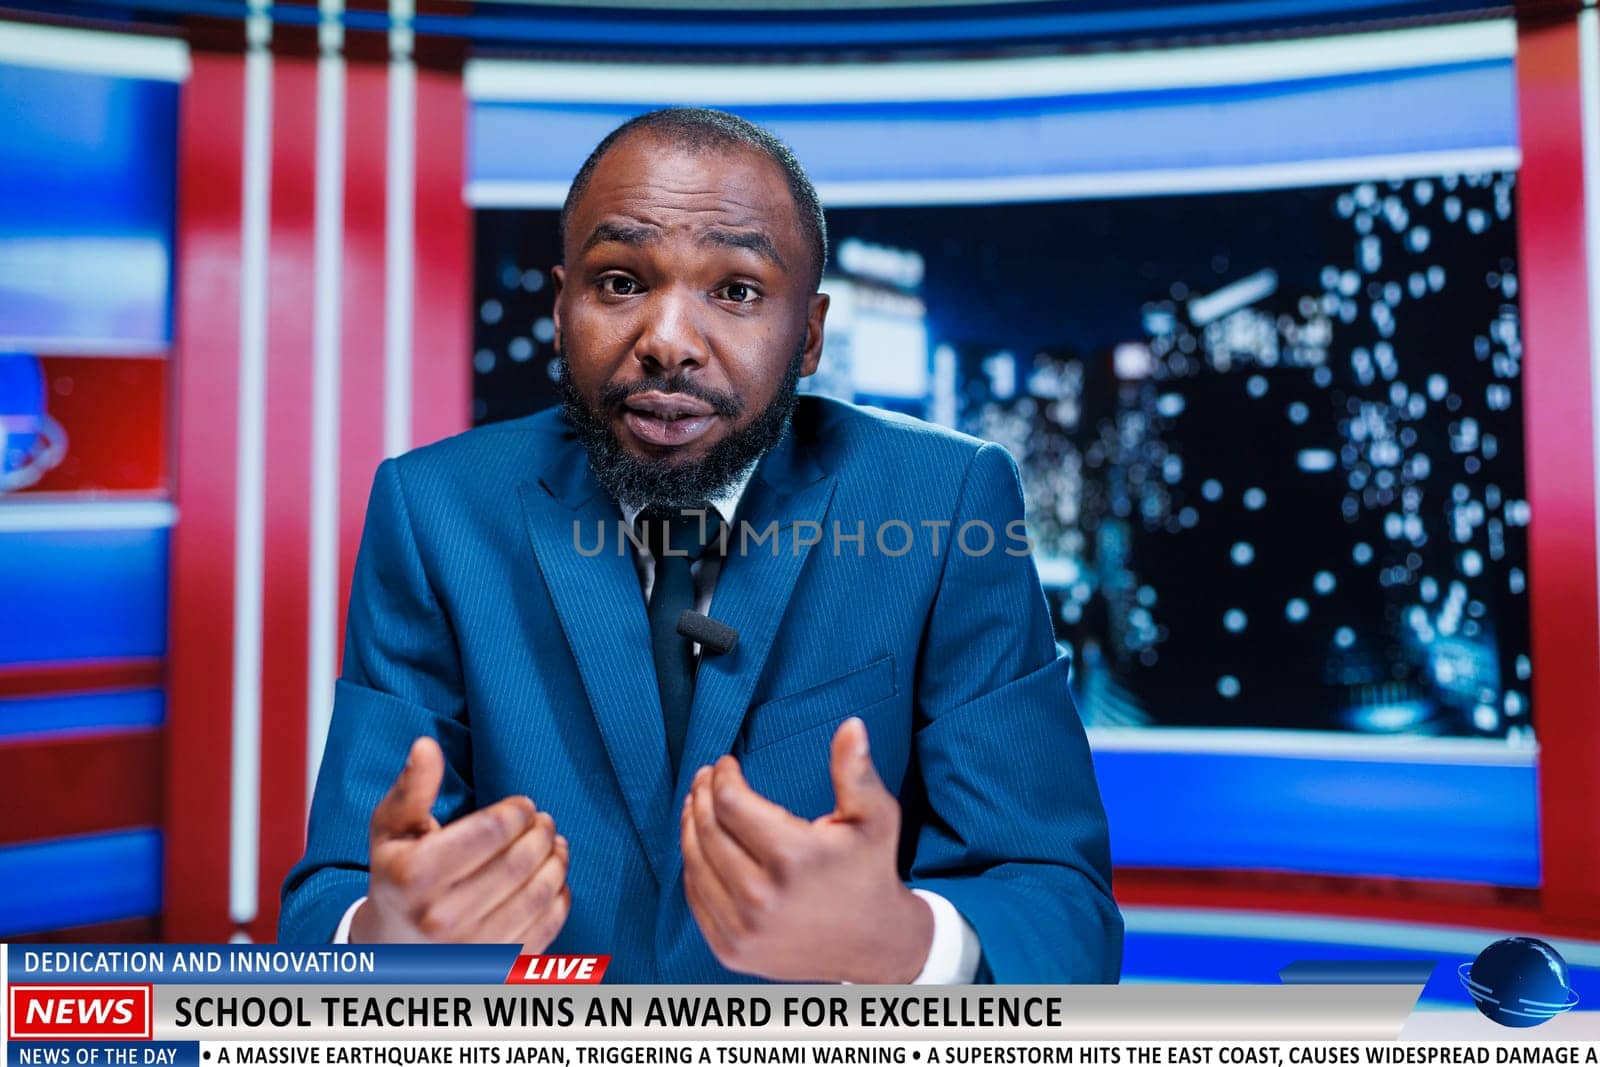 Reporter announces teacher winning award for ingenuity in news studio, man newscaster discussing about successful professor awarded with prize. News anchor hosting live night show.